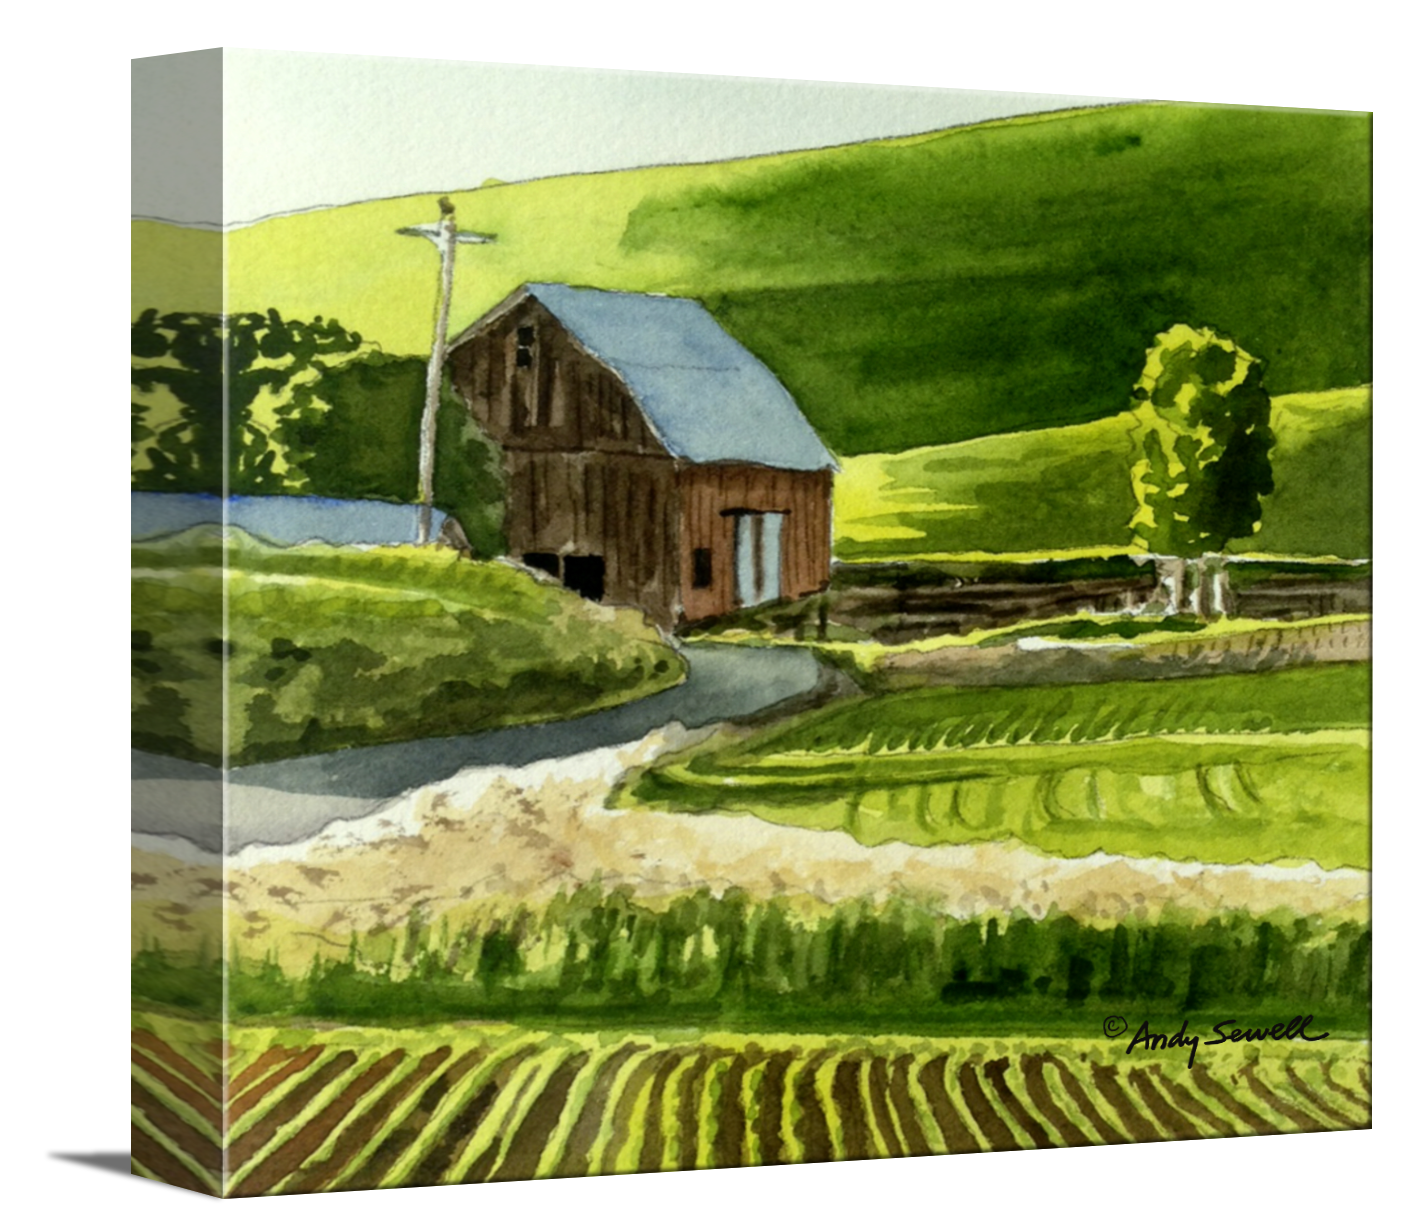 "Spring Country Lines " - 6"x6" Original watercolor or signed edition giclee art print from an original watercolor